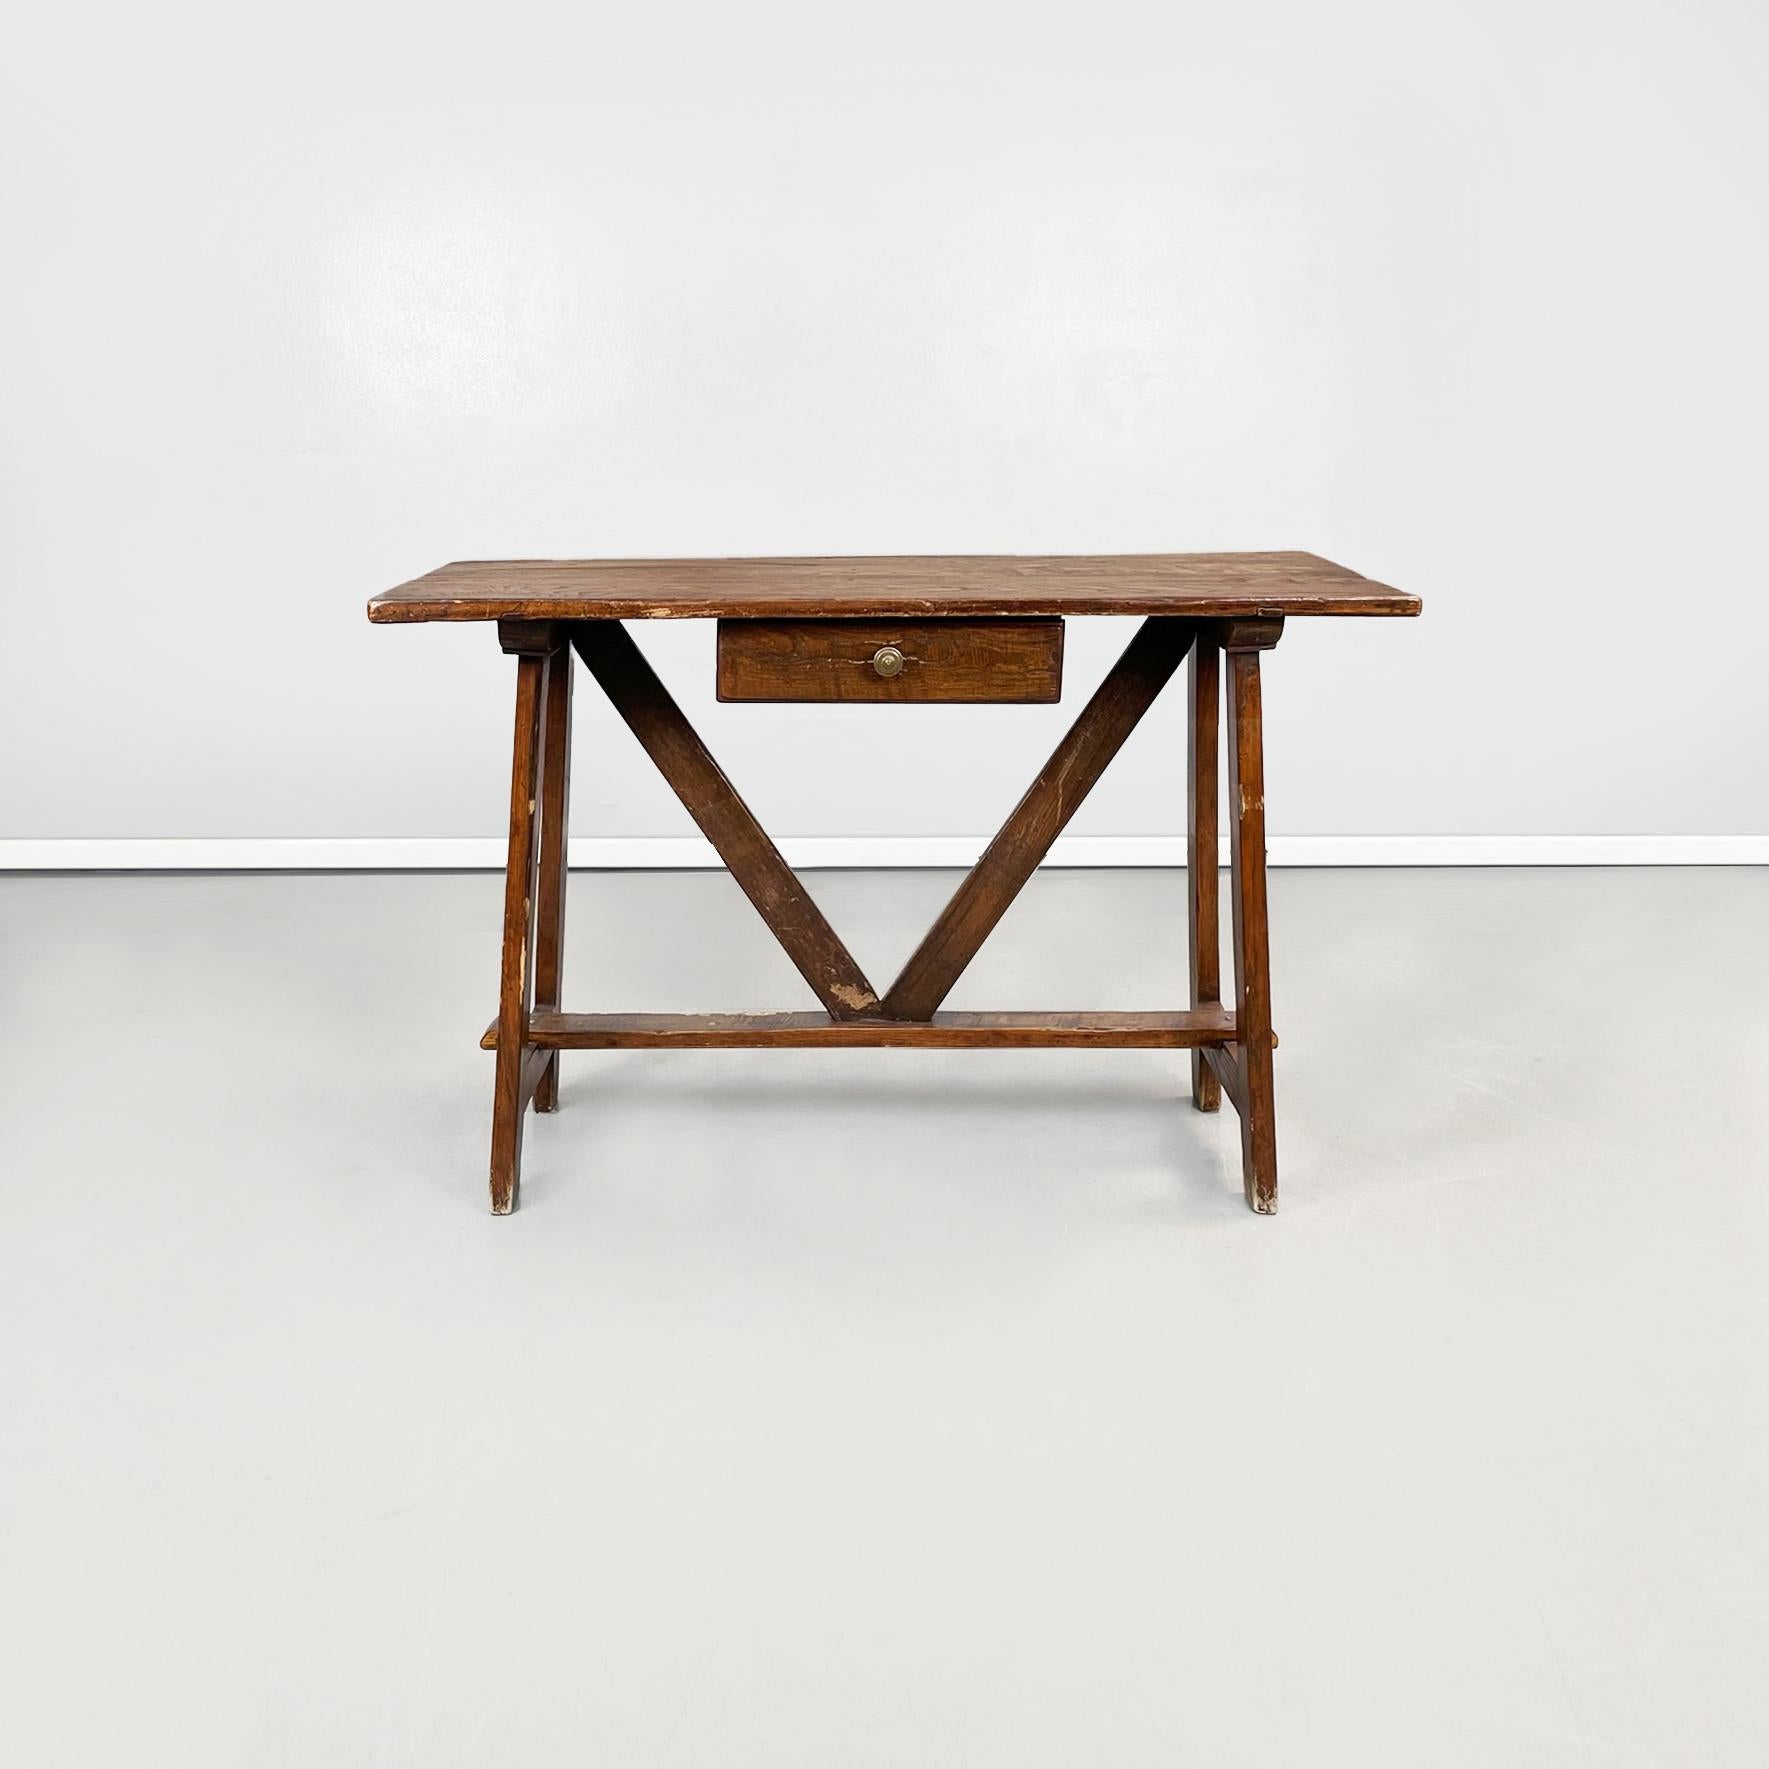 Italian antique Wooden table fratino with a drawer, 1900s
Rectangular wooden fratino table. The supporting structure of the top is made up of several wooden beams. In the center it has a drawer with a round metal handle.
1900s.
Good conditions, it